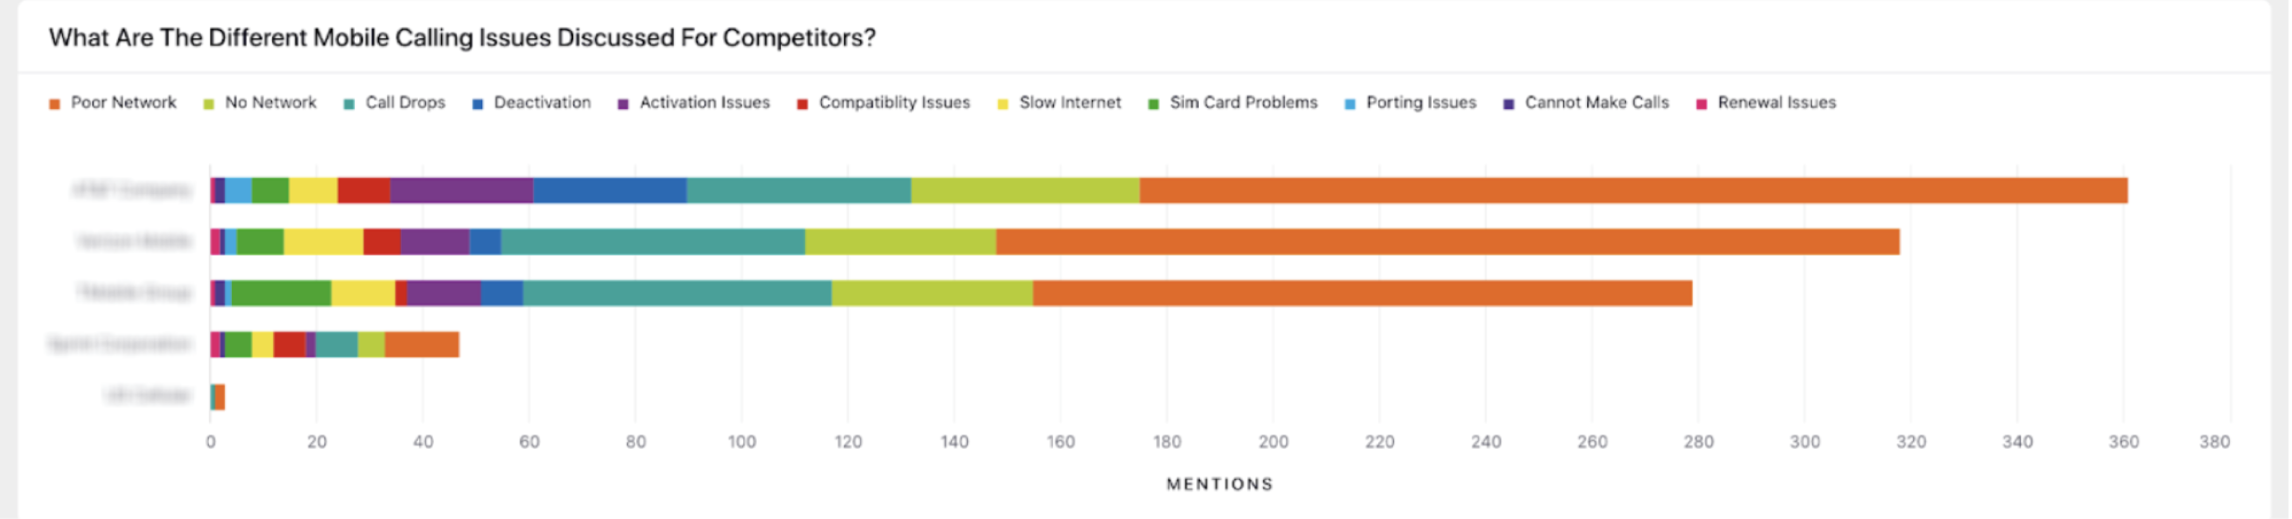 A colorful bar graph showing the number of competitor mentions for different mobile calling issues.